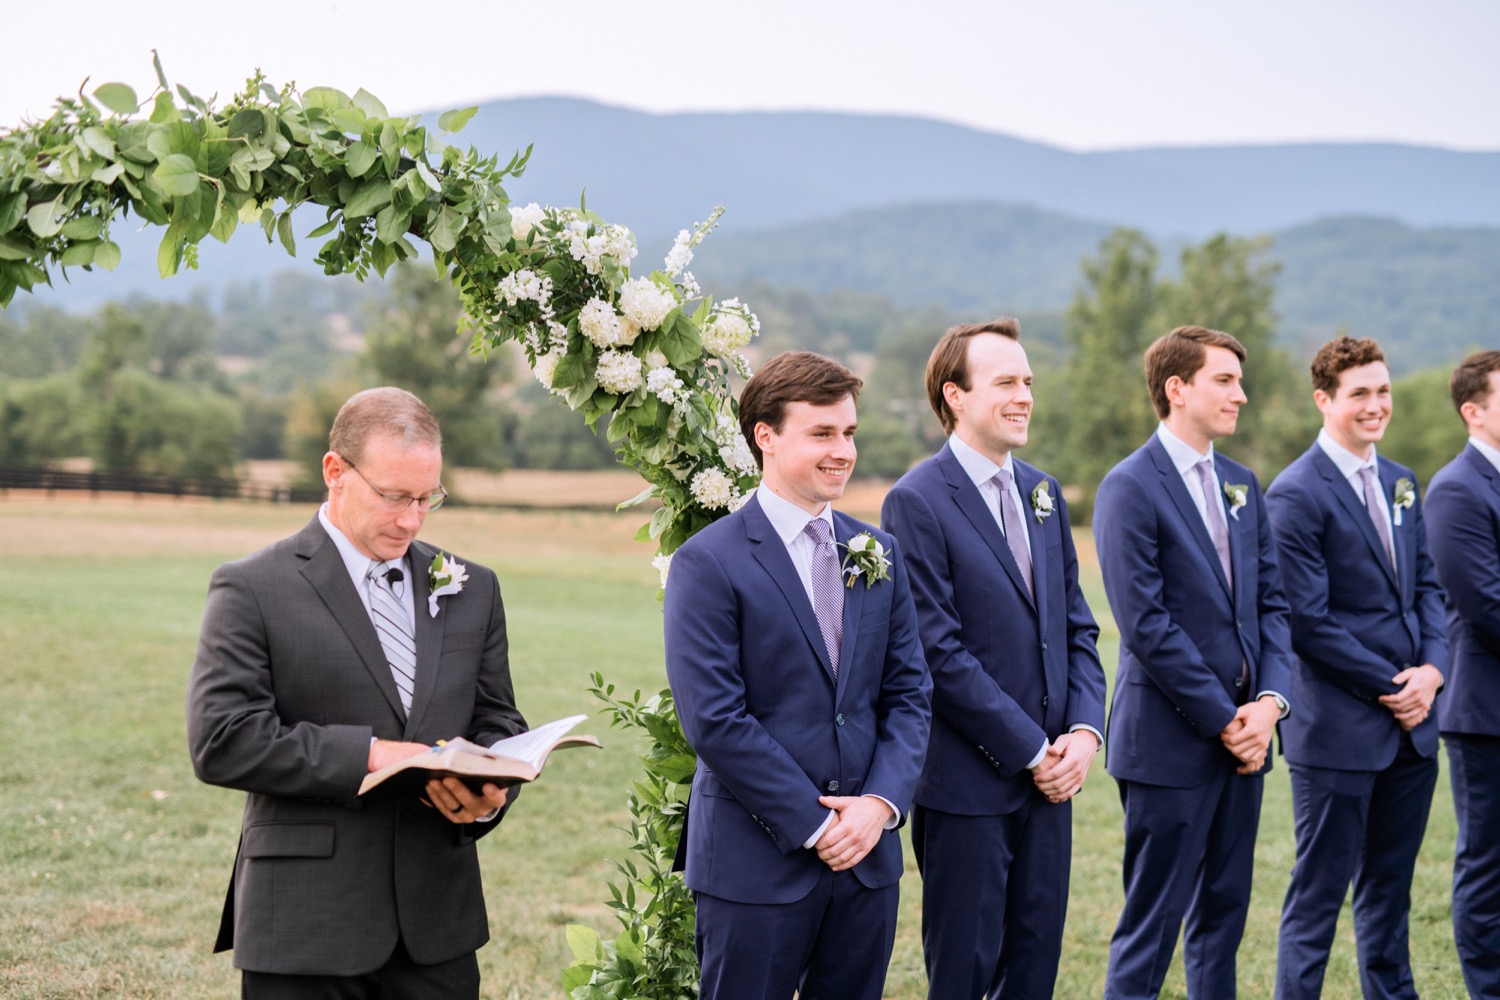 pastor, groom, and groomsmen standing at the alter as the bride walks towards them